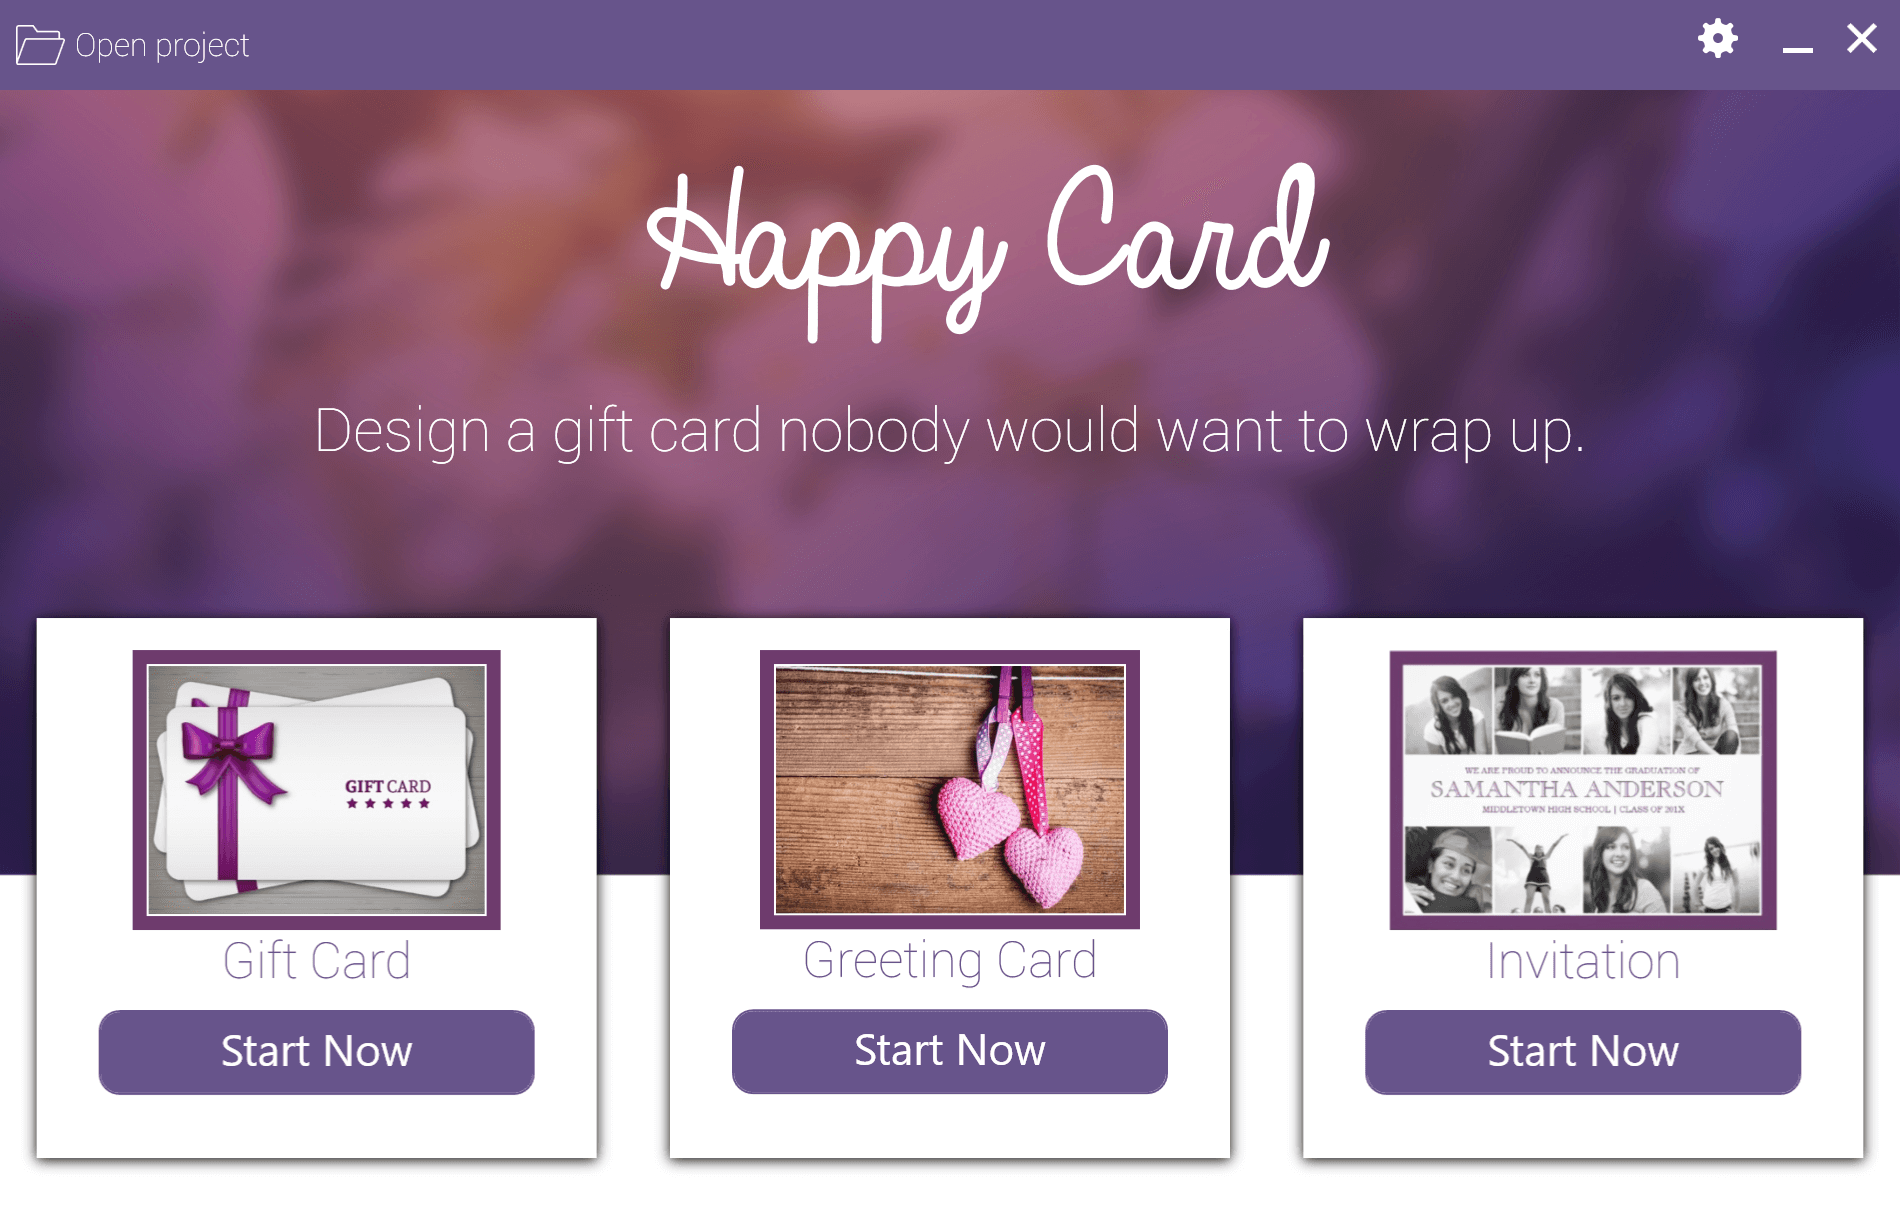 Choose whether you want to create a gift card, a greeting card or an invitation. 